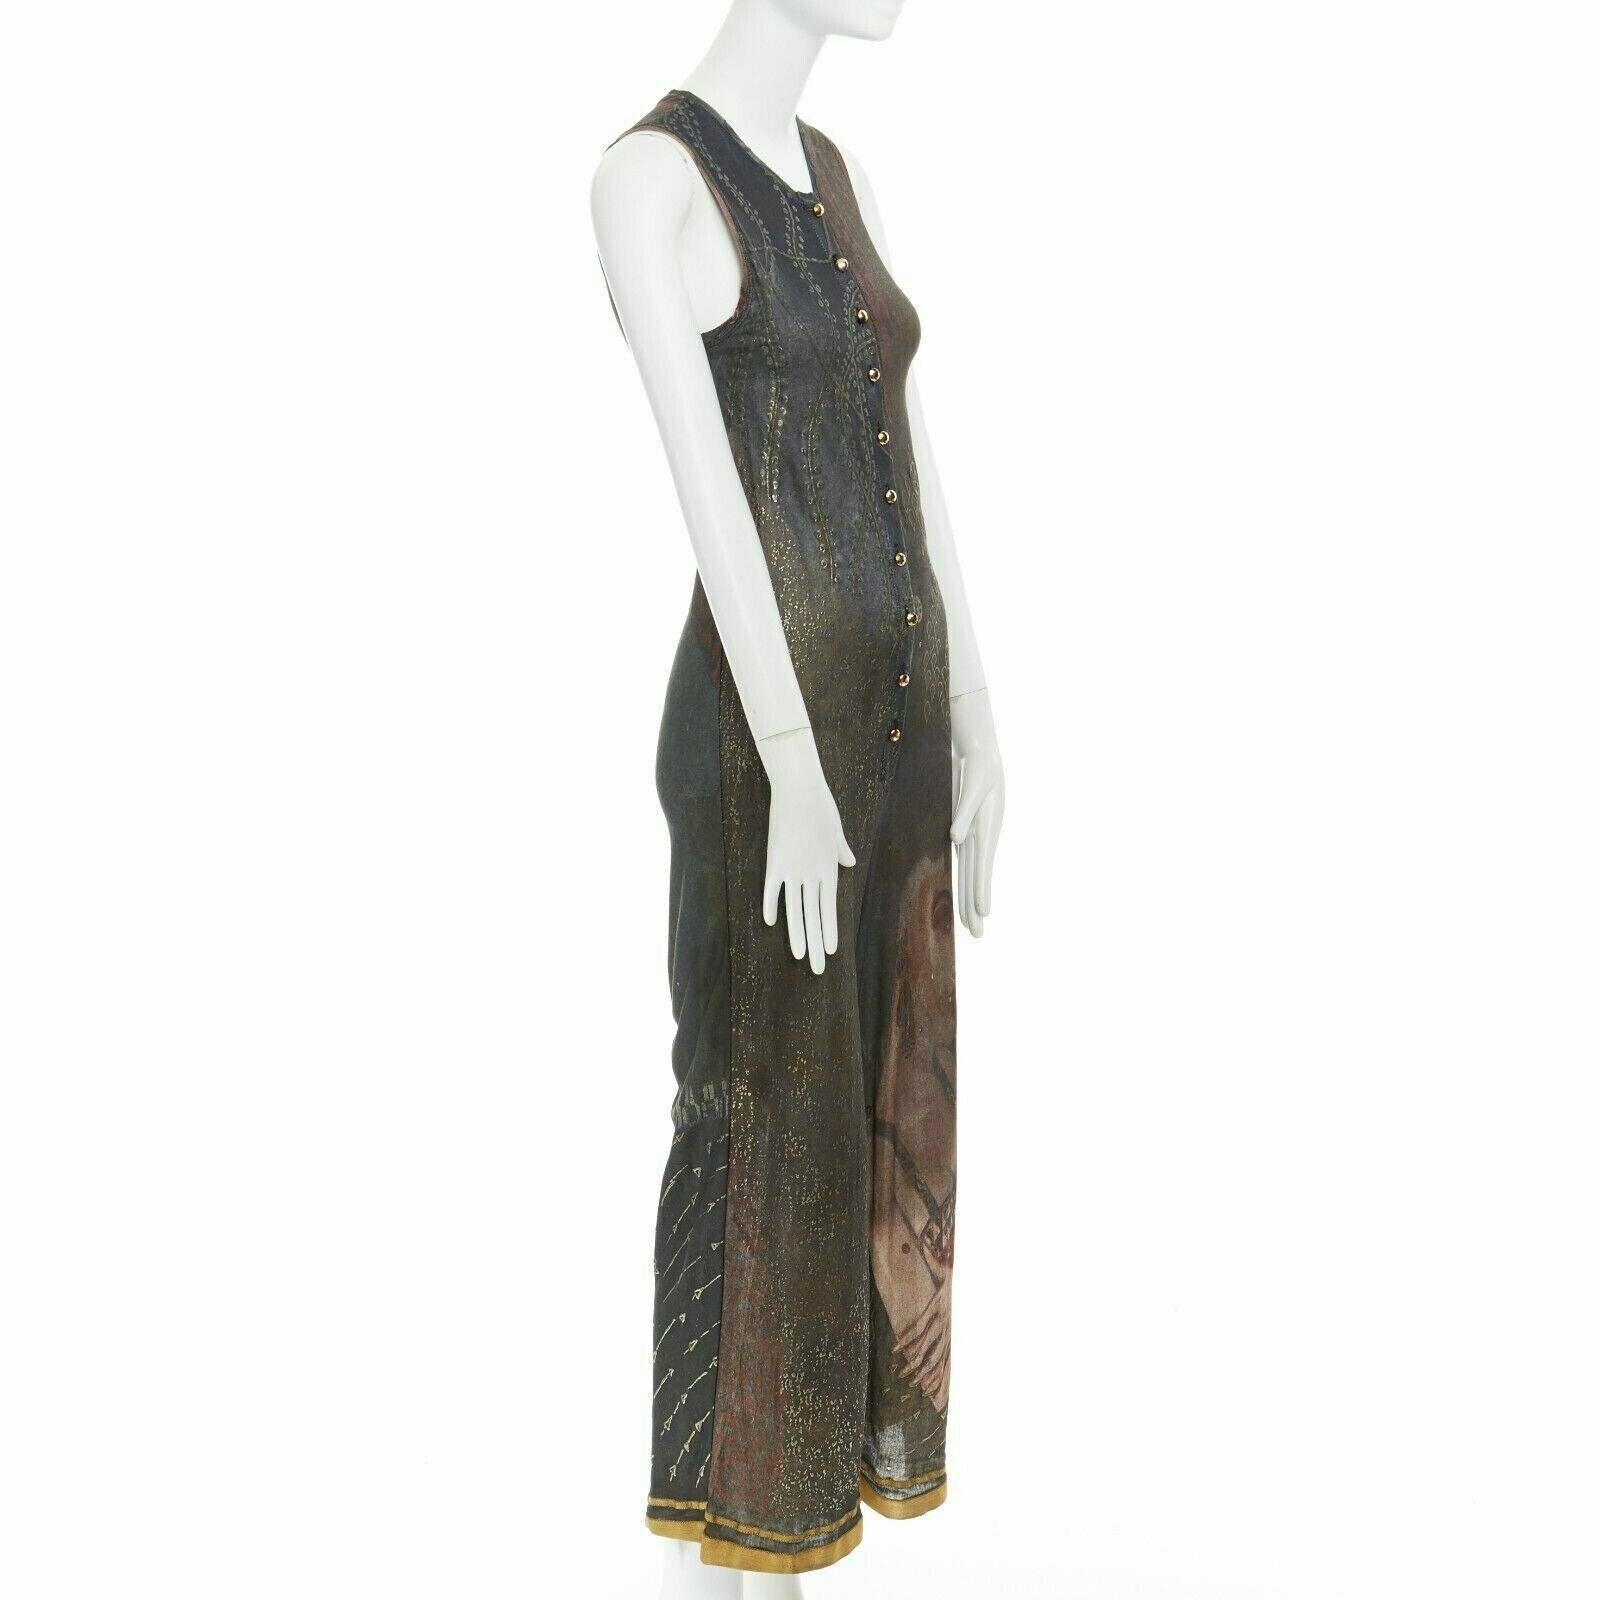 JEAN PAUL GAULTIER Vintage SS89 Klimt ethnic oriental face jumpsuit IT38 US2 
Reference: CRTI/A00070 
Brand: Jean Paul Gaultier 
Material: Viscose 
Color: Brown 
Pattern: Other 
Closure: Button 
Extra Detail: Viscose. Light brow. Splattered washed